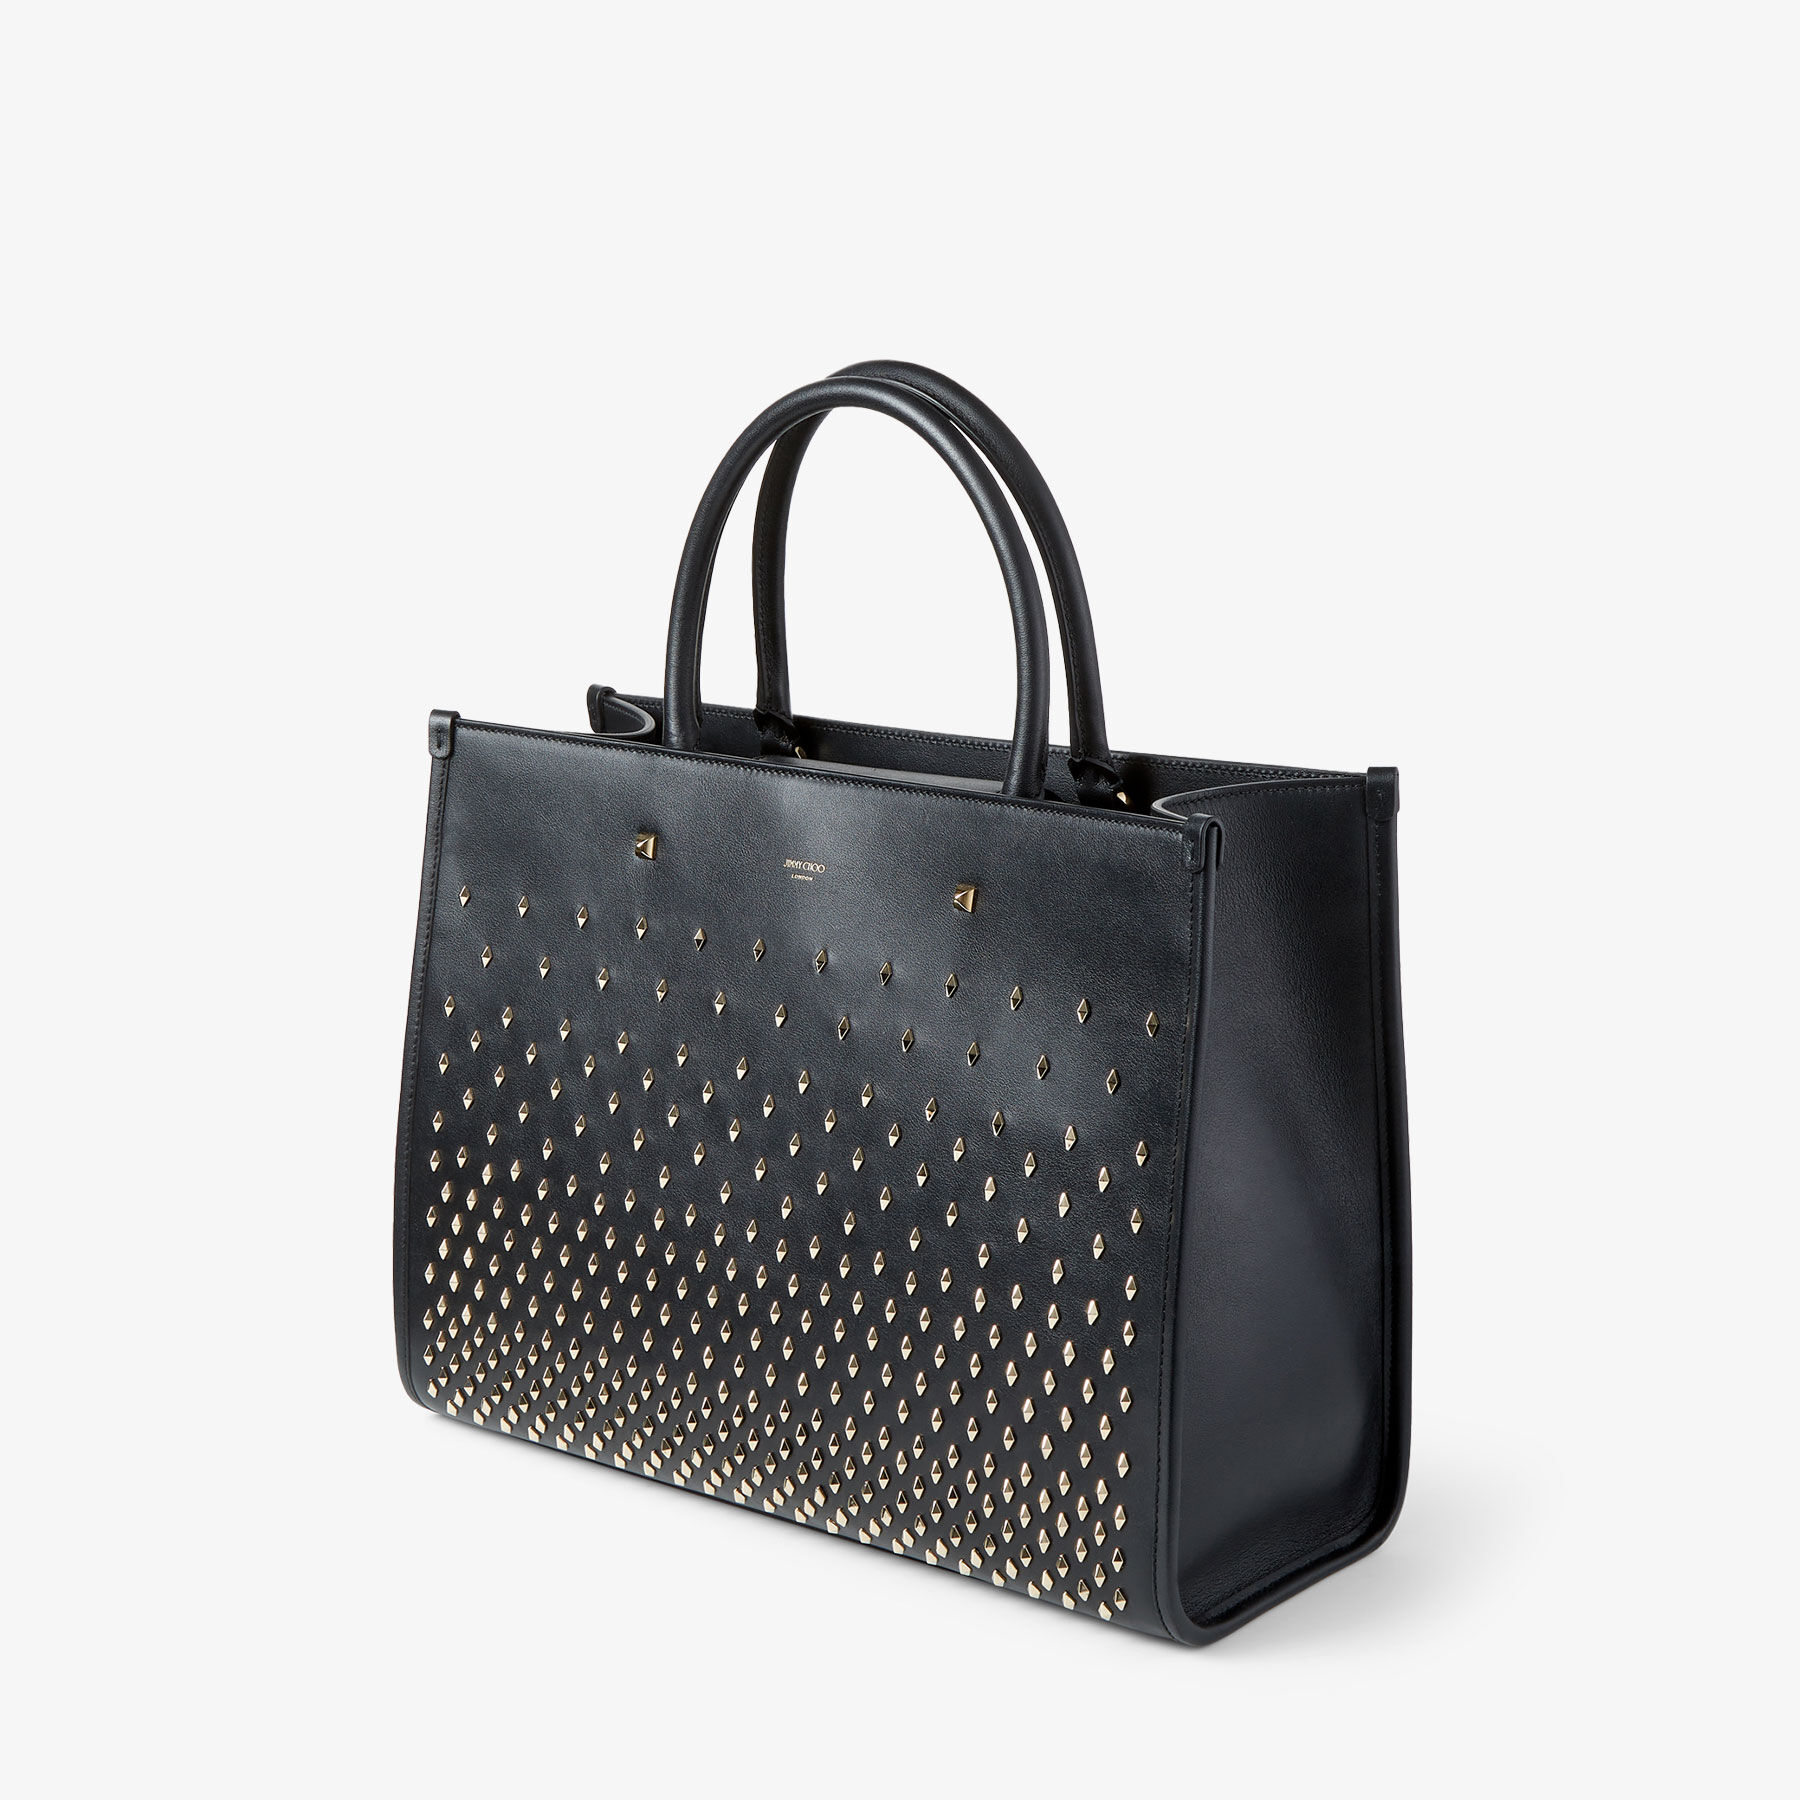 AVENUE M TOTE | Black Leather Tote Bag with Studs | Summer 